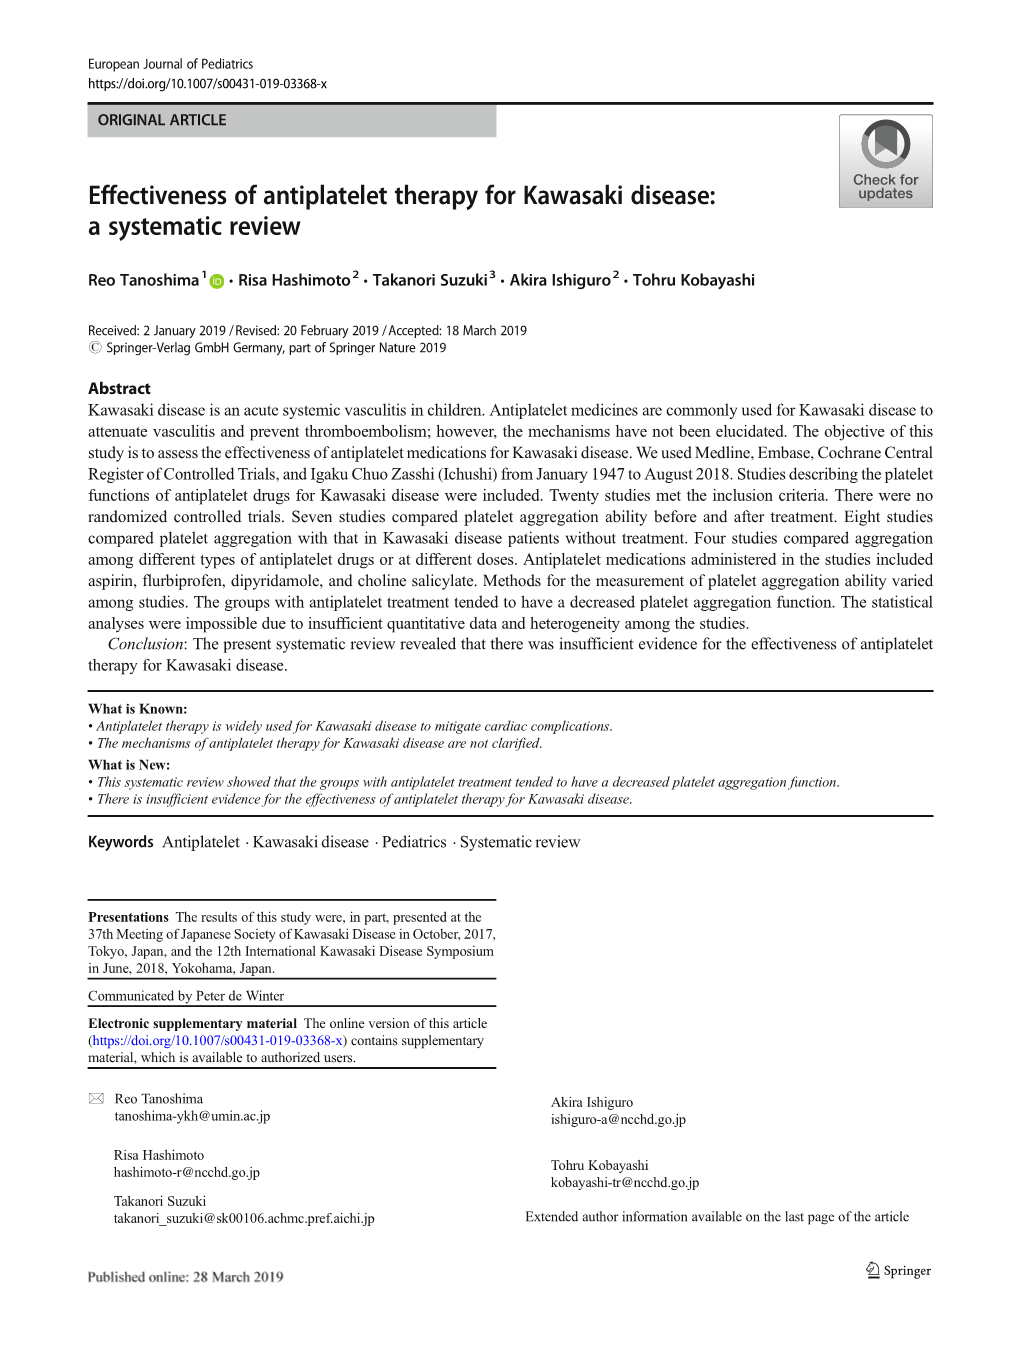 Effectiveness of Antiplatelet Therapy for Kawasaki Disease: a Systematic Review